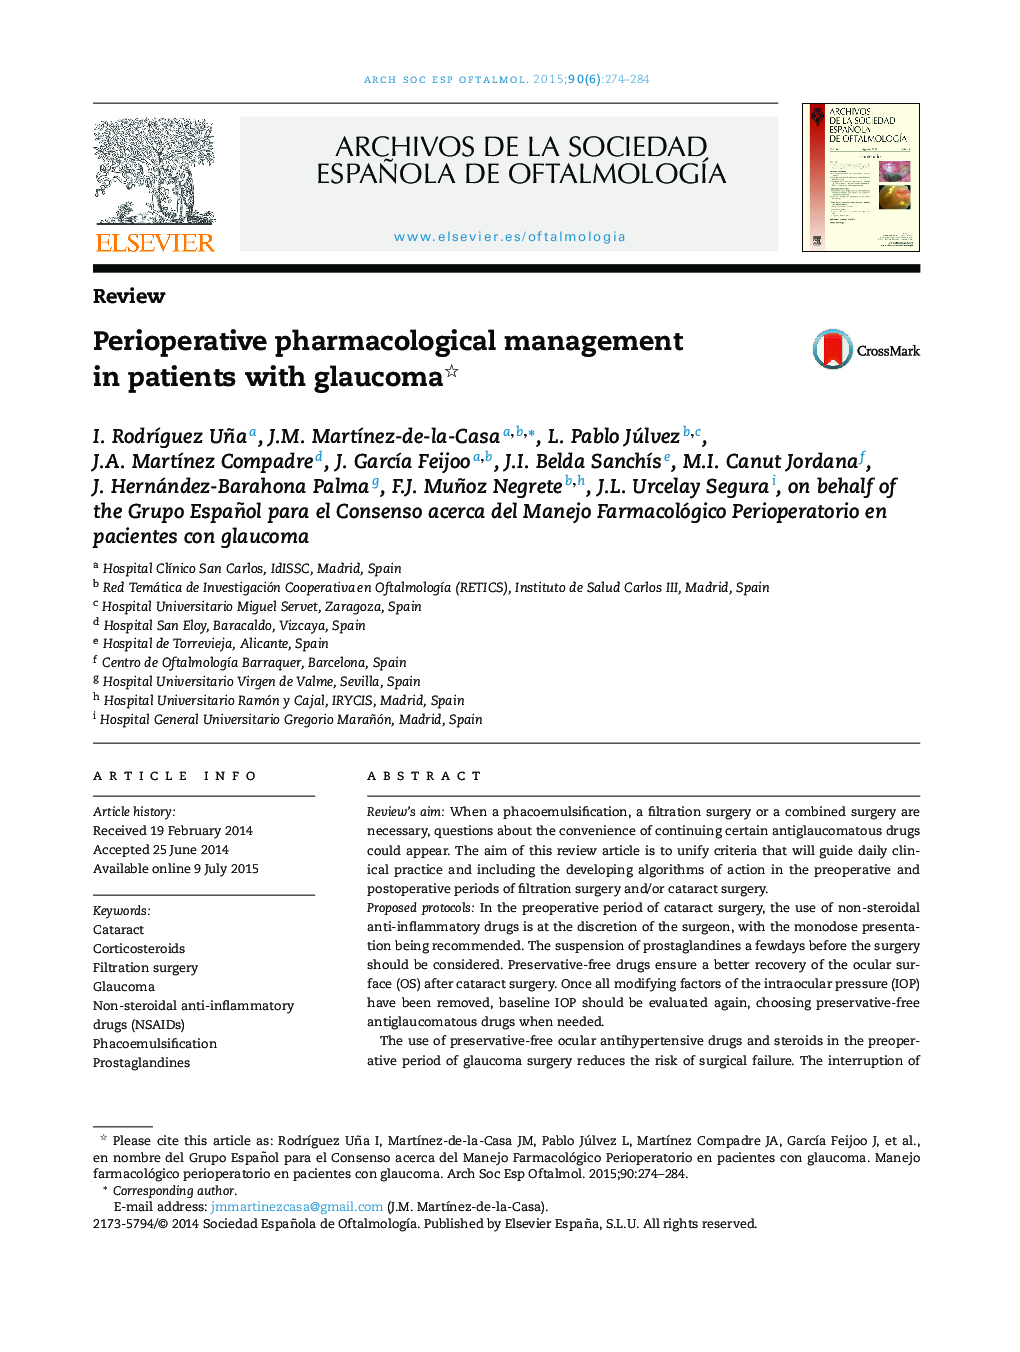 Perioperative pharmacological management in patients with glaucoma 